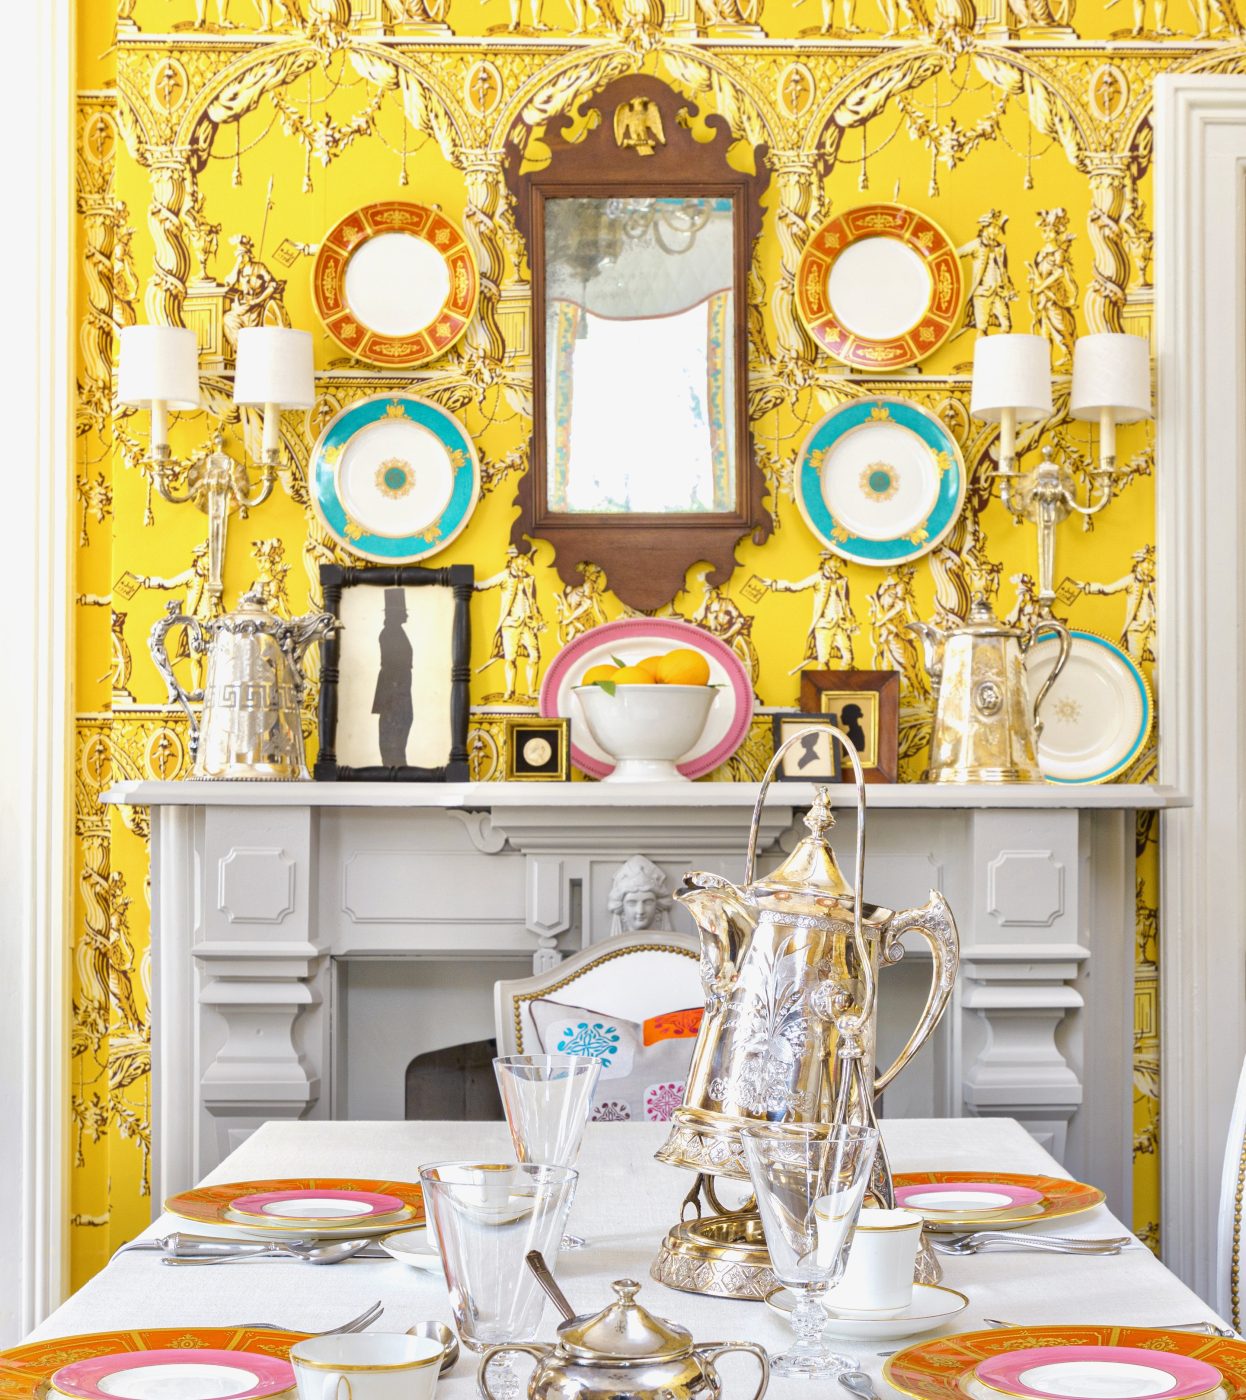 The yellow dining room at the Henry Blosser House, in Malta Bend, Missouri, designed by Kelee Katillac